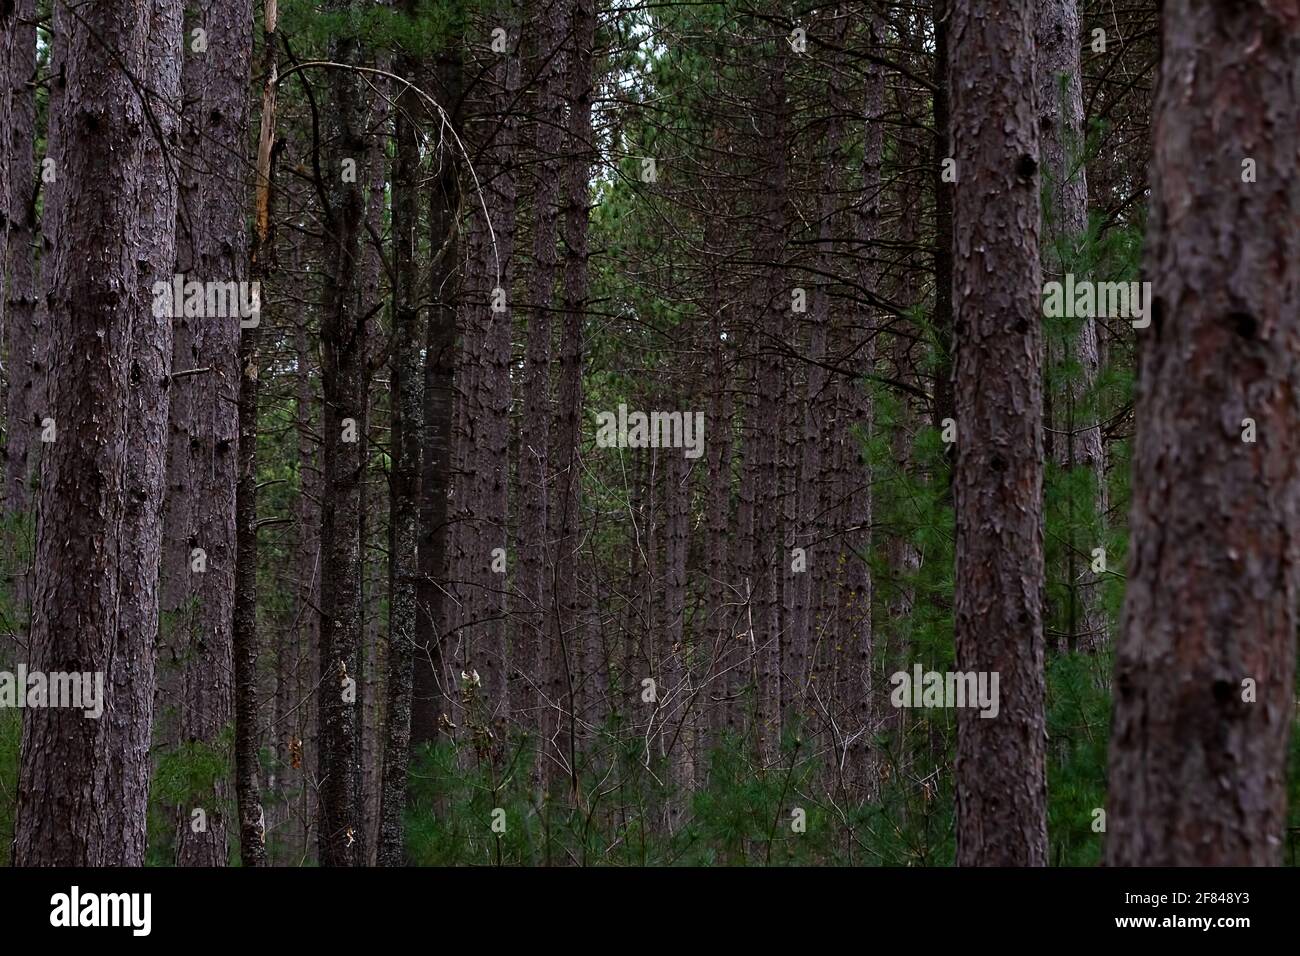 Forest with tall straight trees that were clearly planted in rows long ago Stock Photo